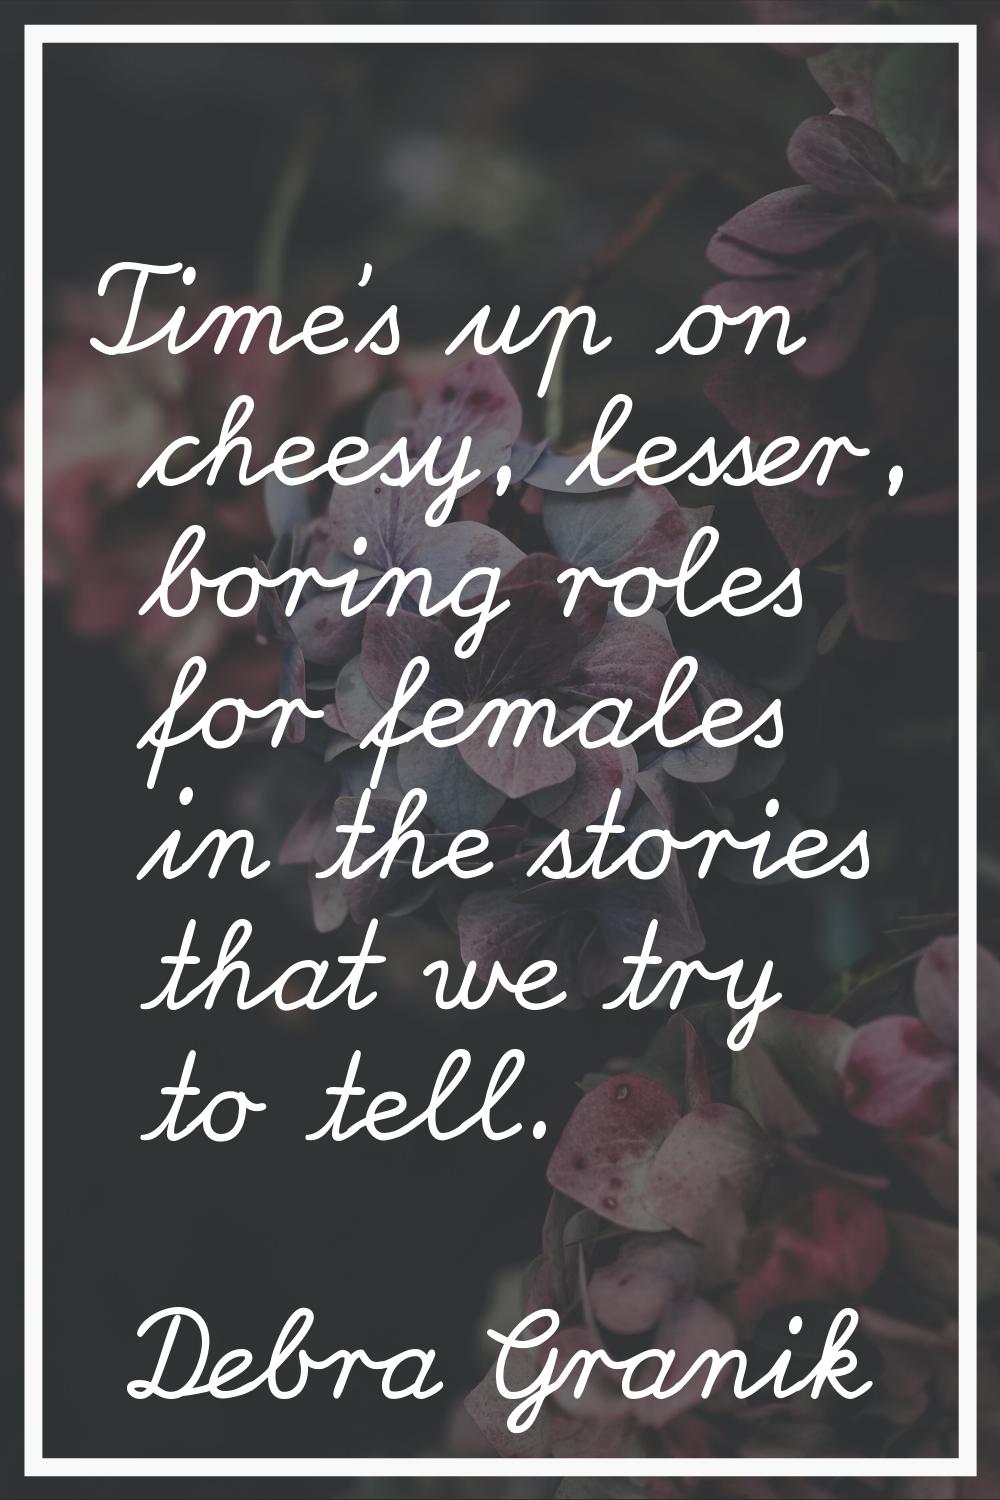 Time's up on cheesy, lesser, boring roles for females in the stories that we try to tell.